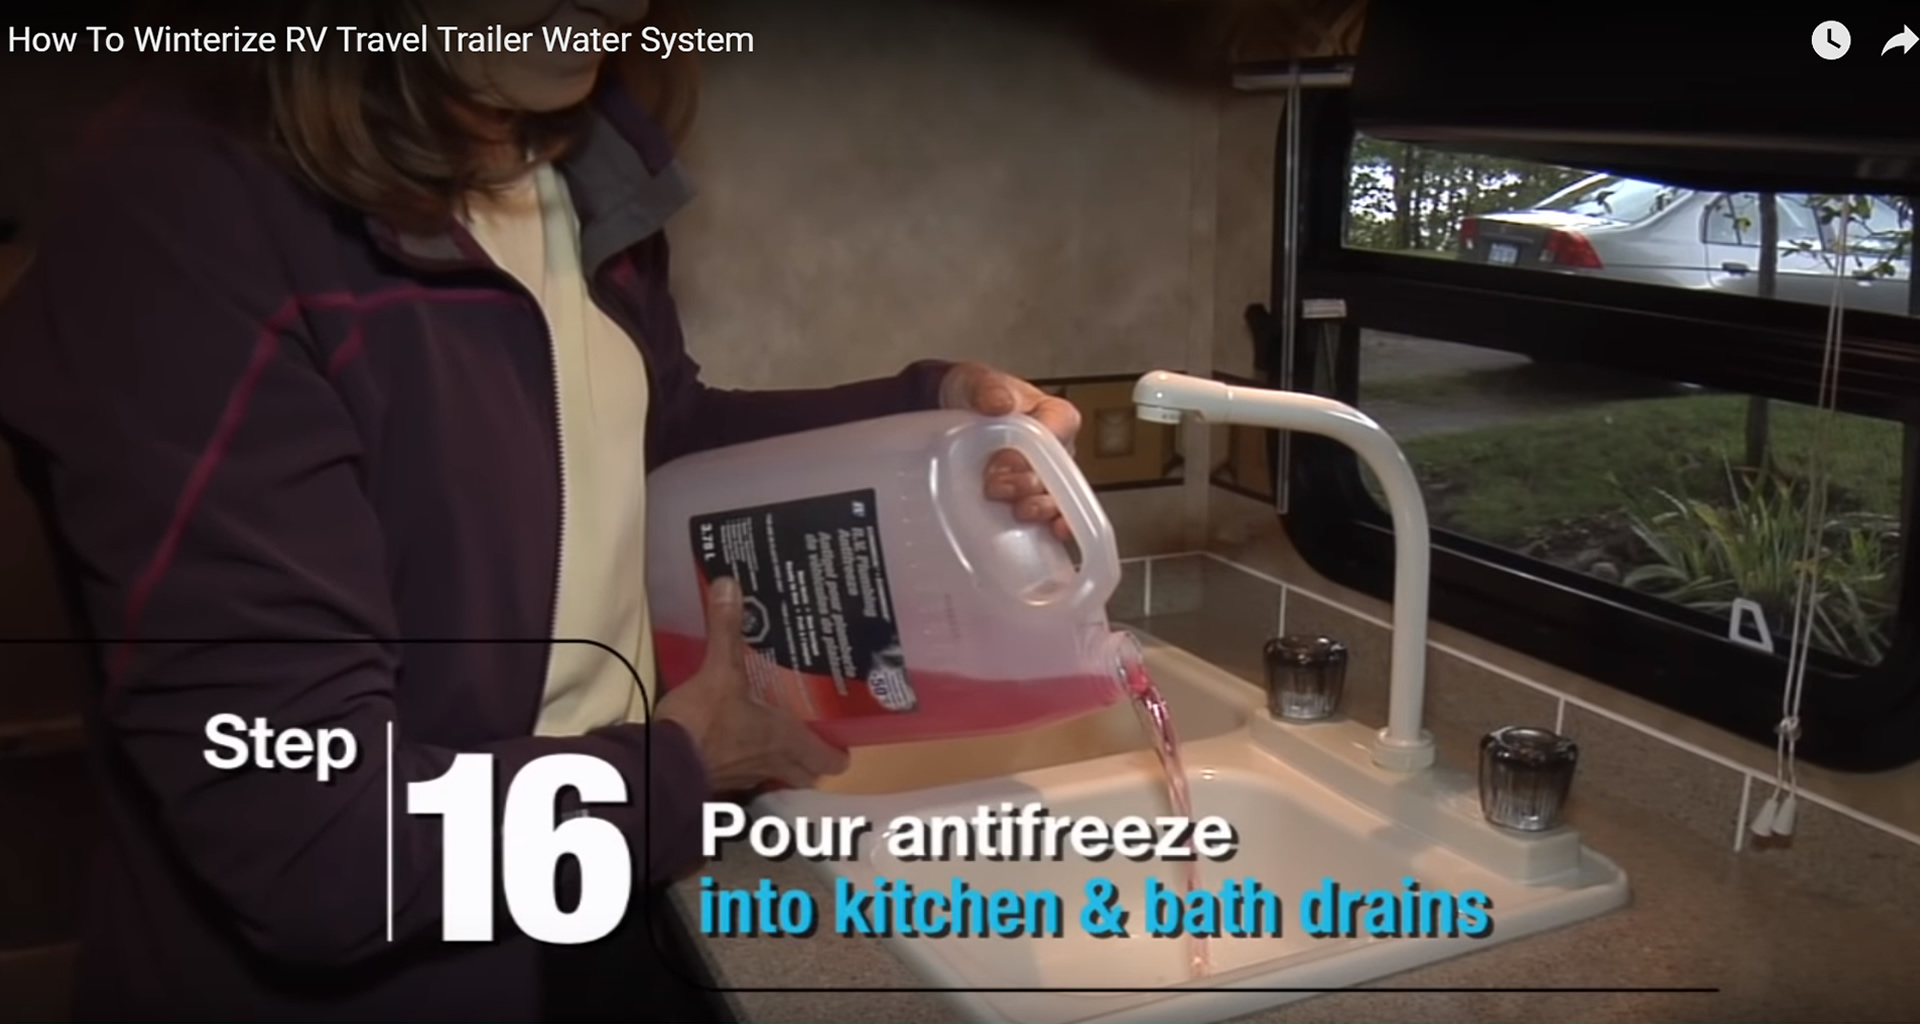 16 Steps - How to Winterize Your RV Travel Trailer - Step 16